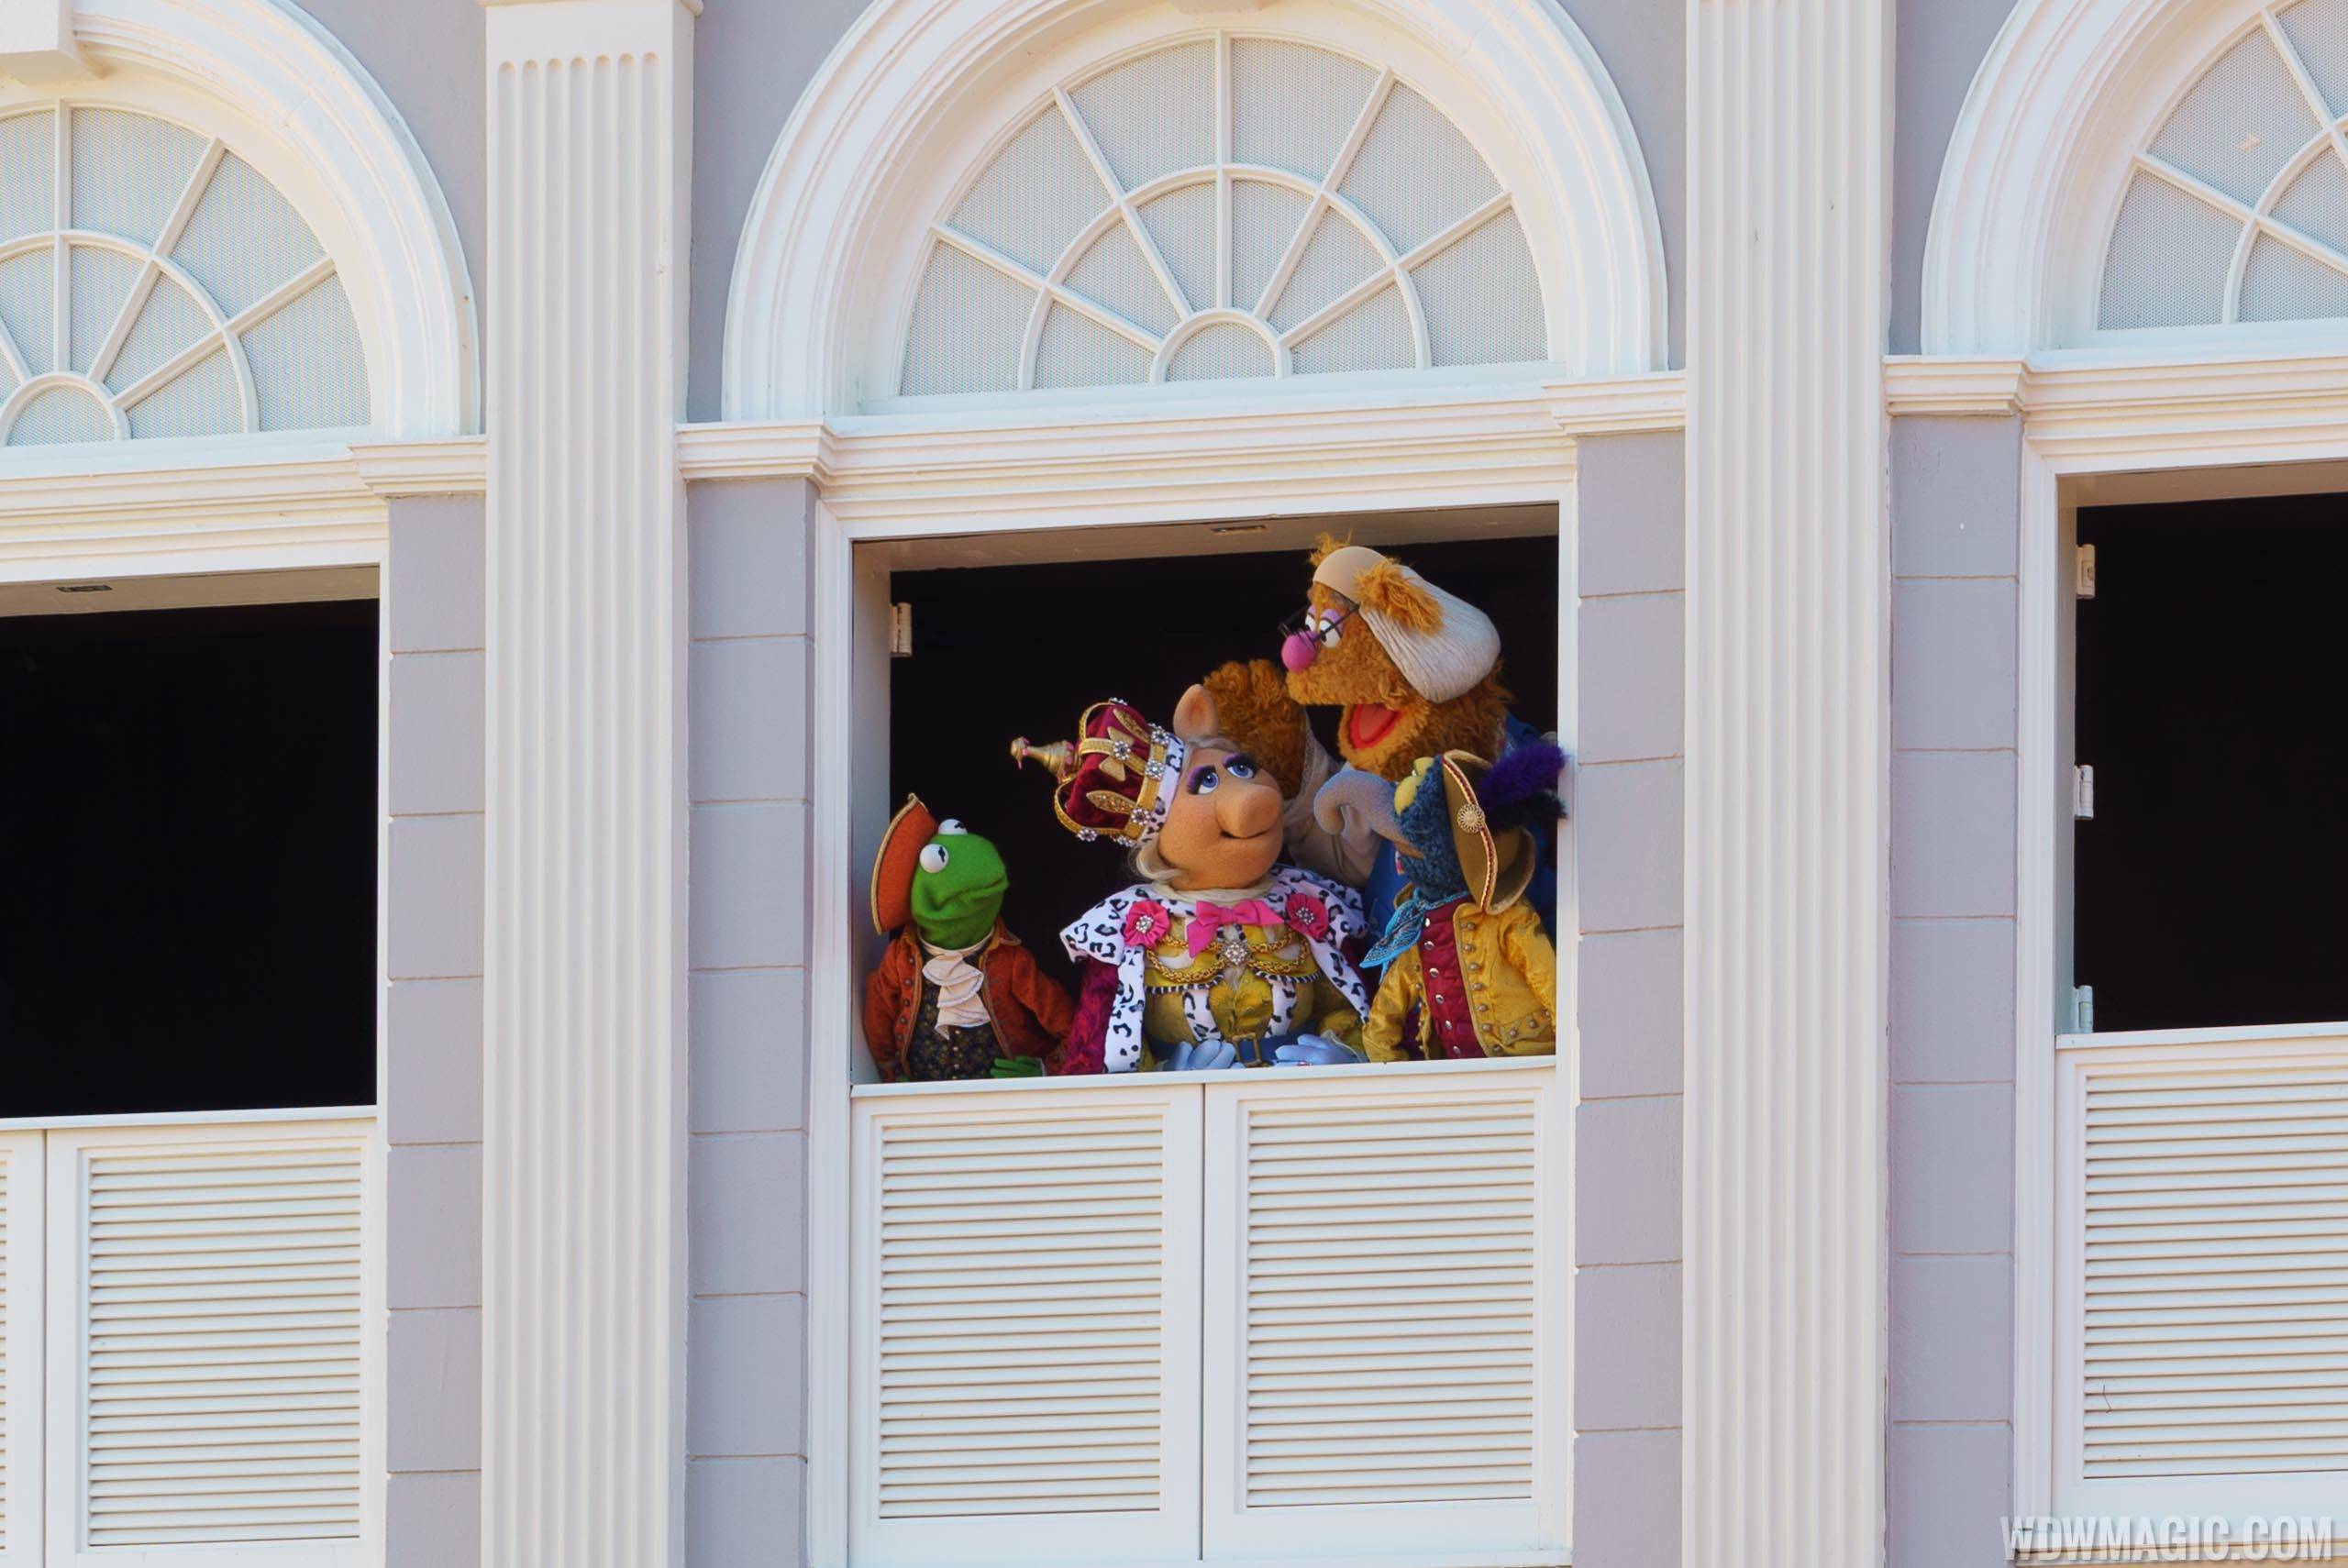 'The Muppets Present Great Moments in American History' show